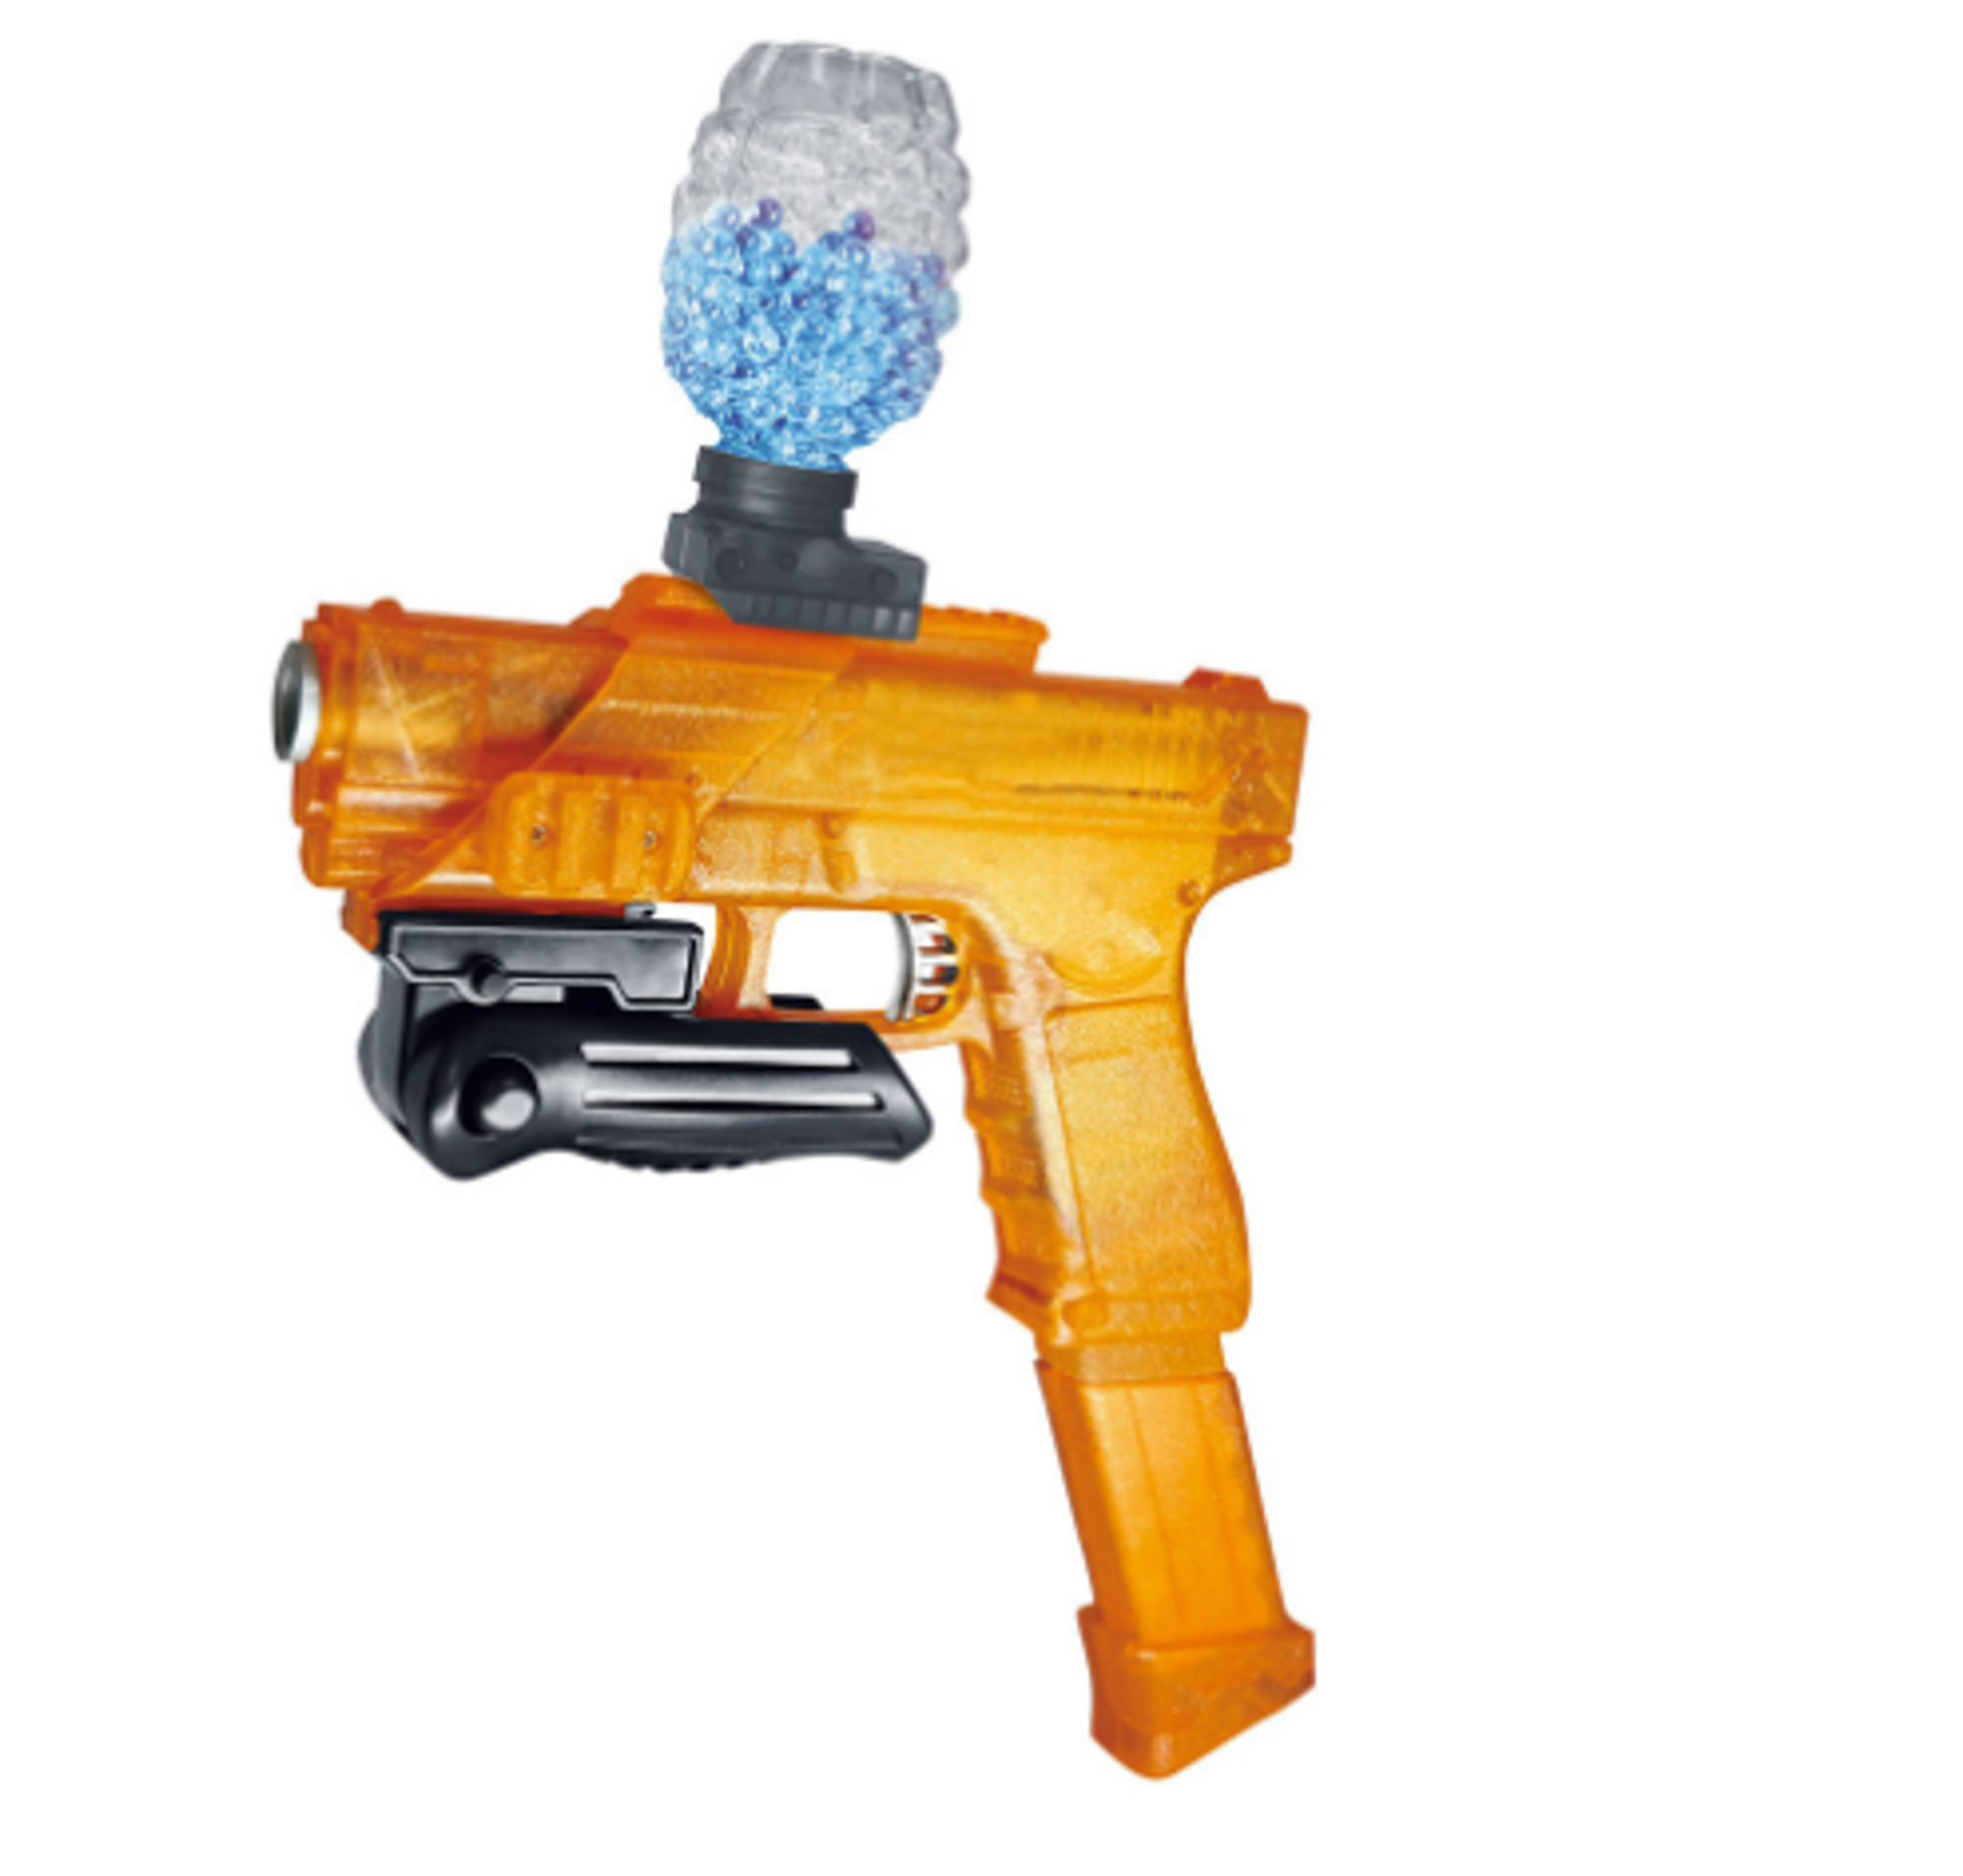 Water Blaster Toy Gun, Summer Fully Automatic Electric Water Gun, Rechargeable Long-Range Continuous Firing Party Game Kids Gift